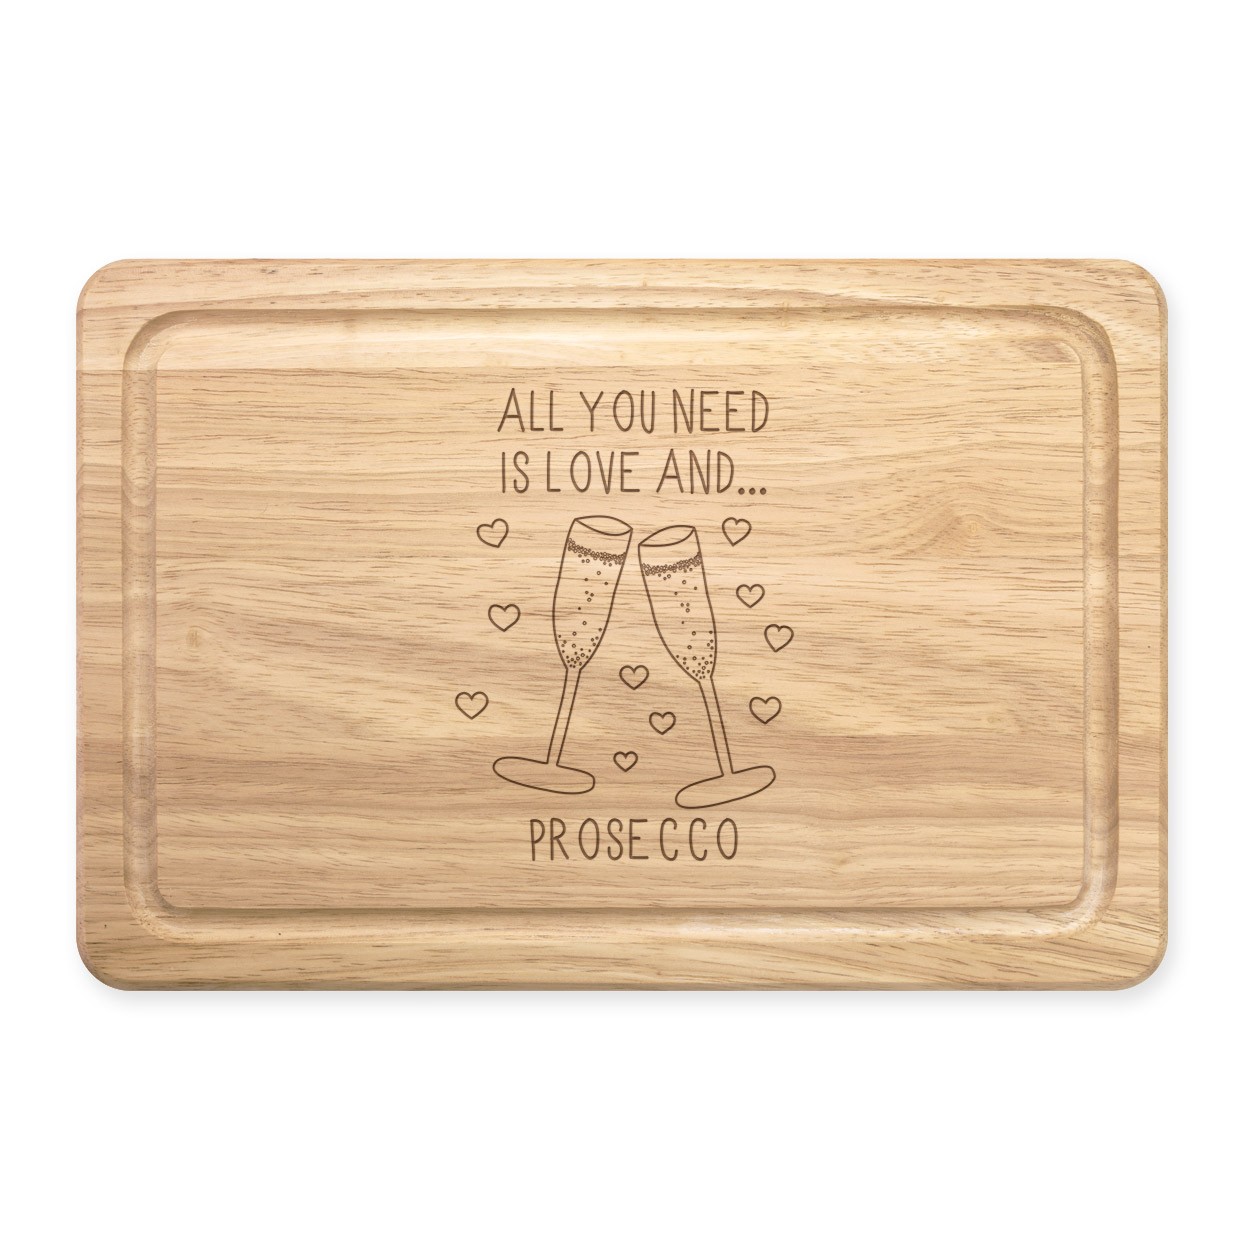 All You Need Is Love And Prosecco Rectangular Wooden Chopping Board